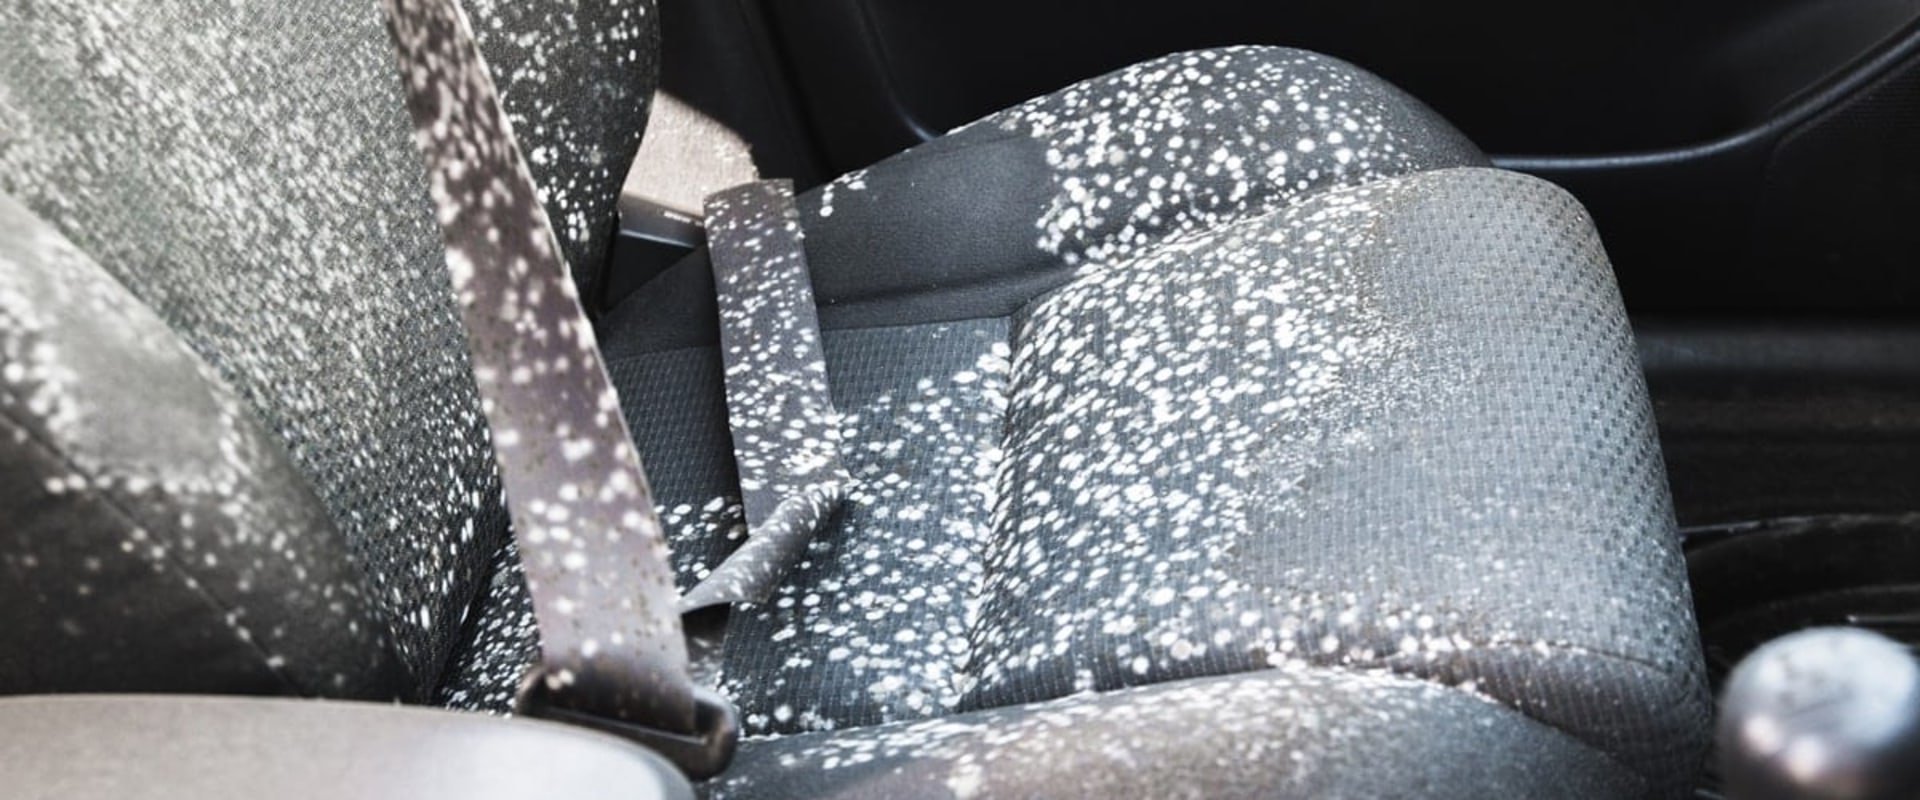 How to Get Rid of Mold in Your Car